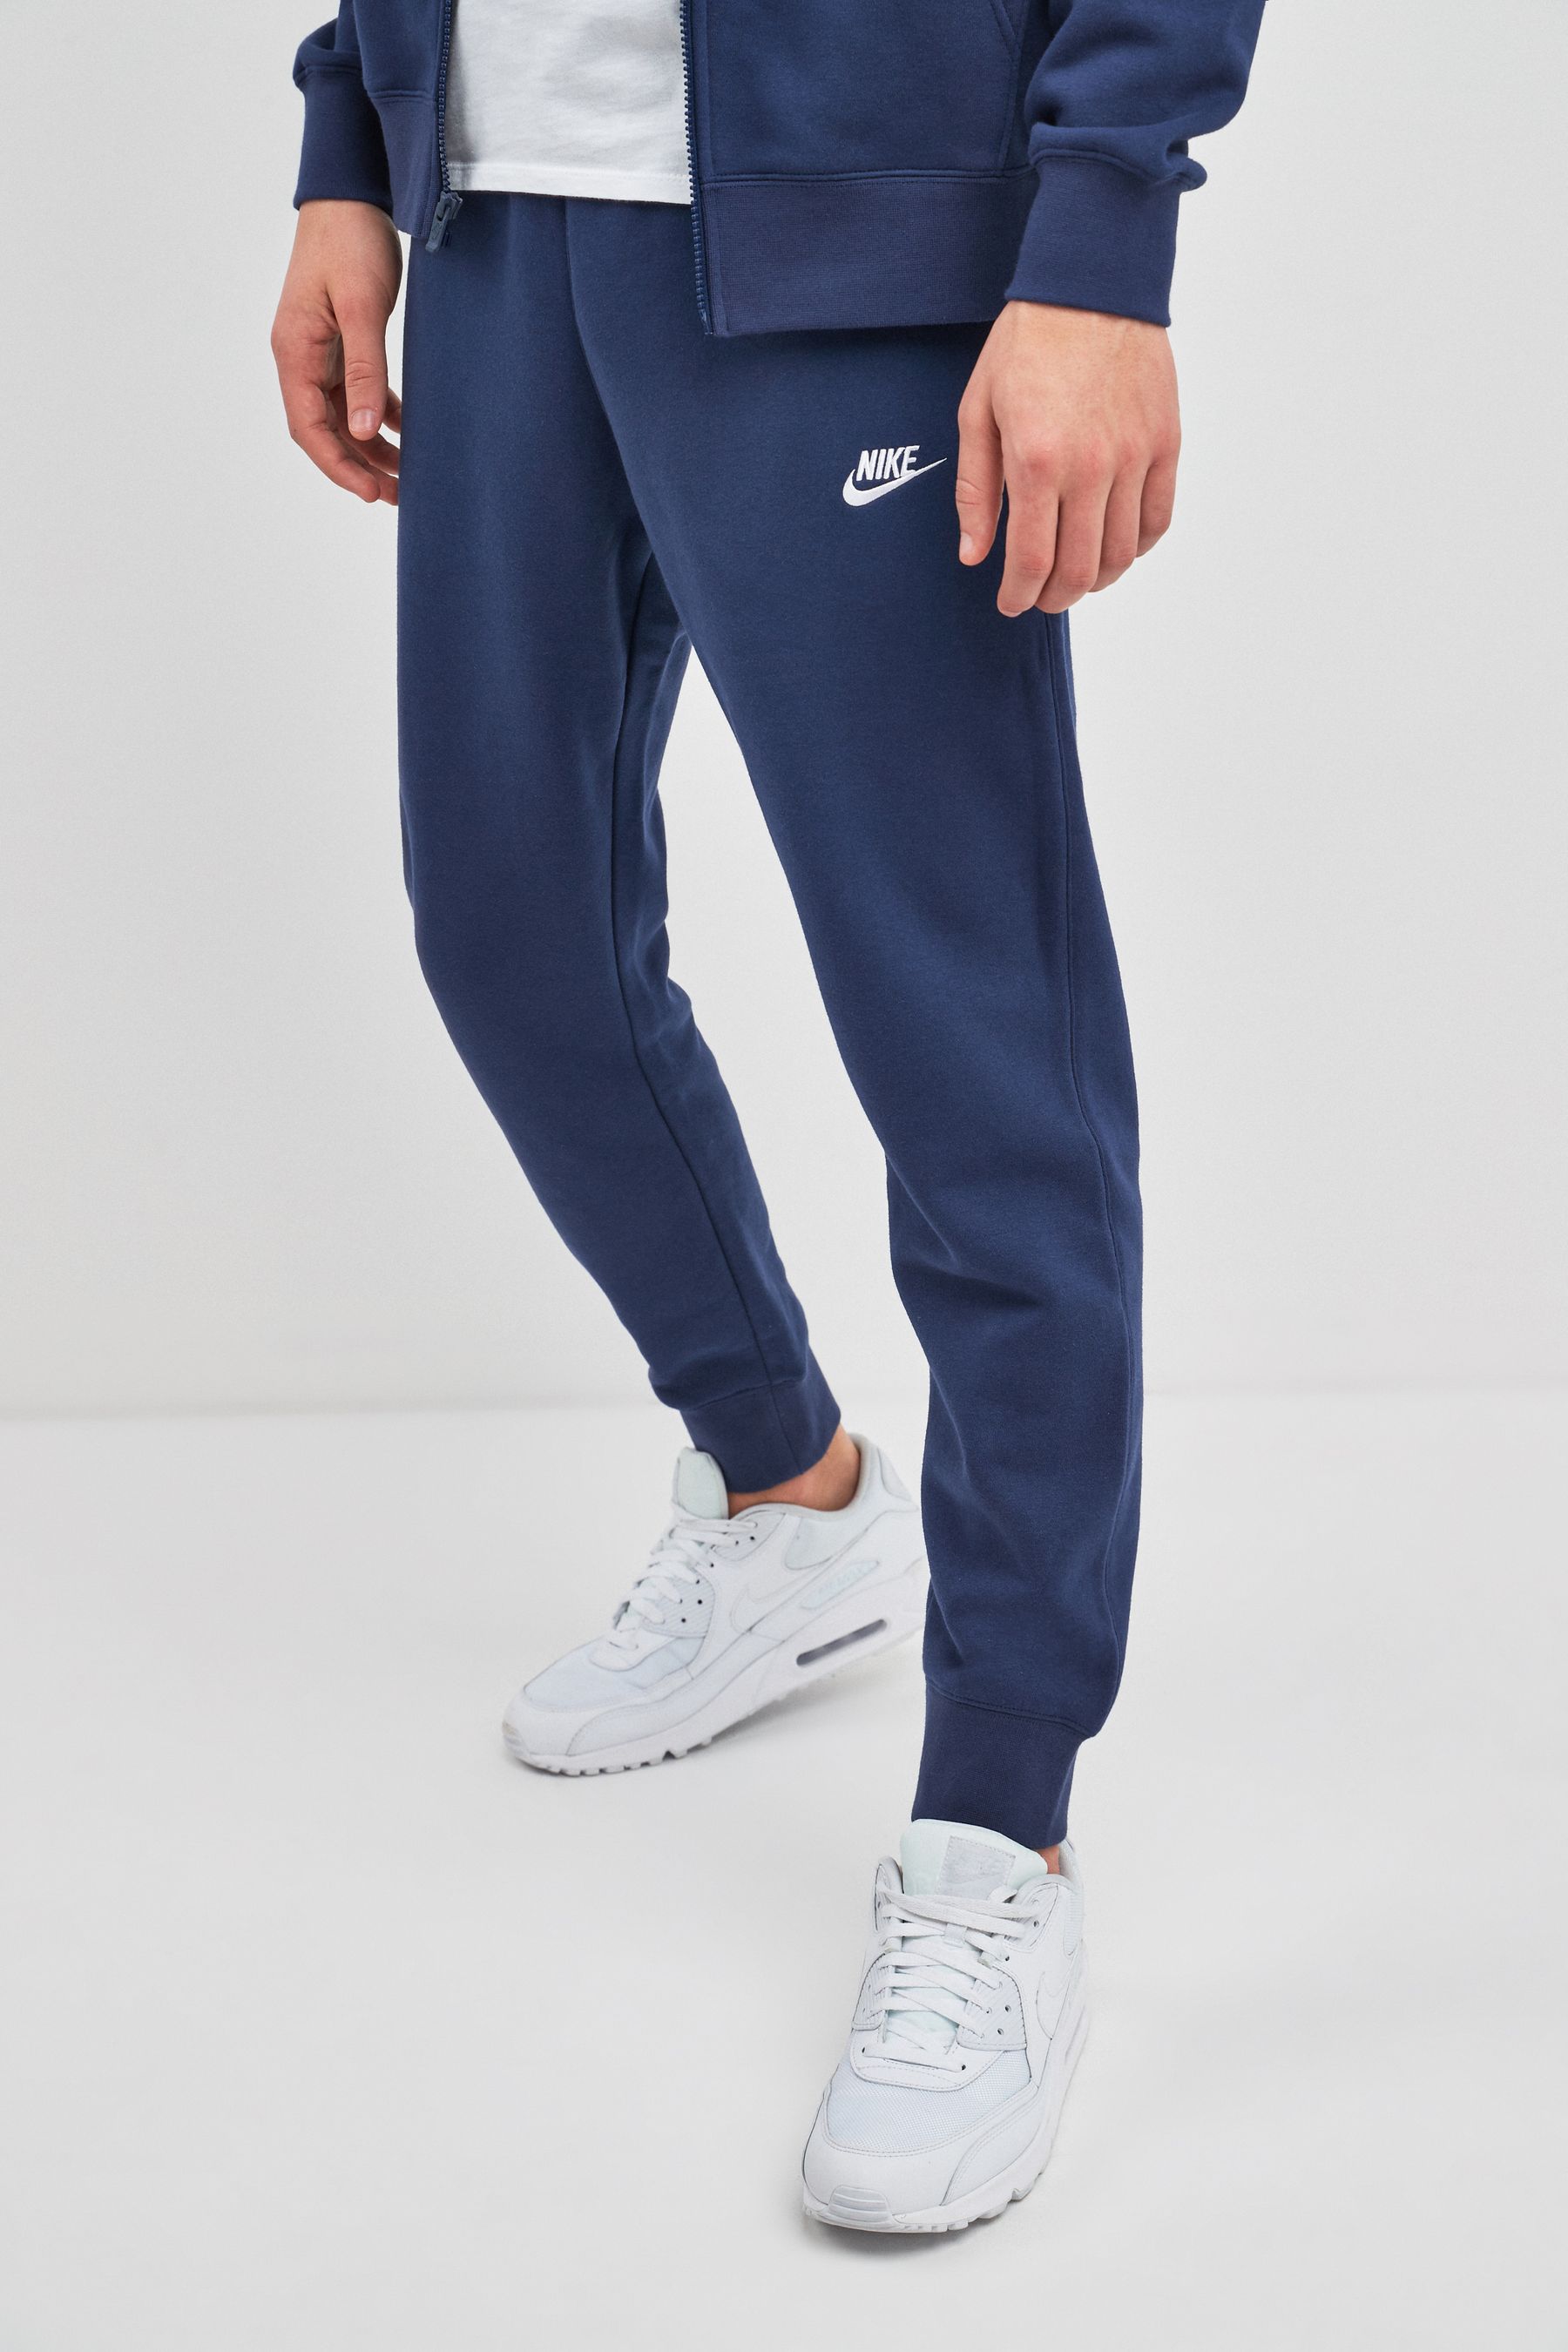 Buy Nike Navy Club Joggers from the Next UK online shop